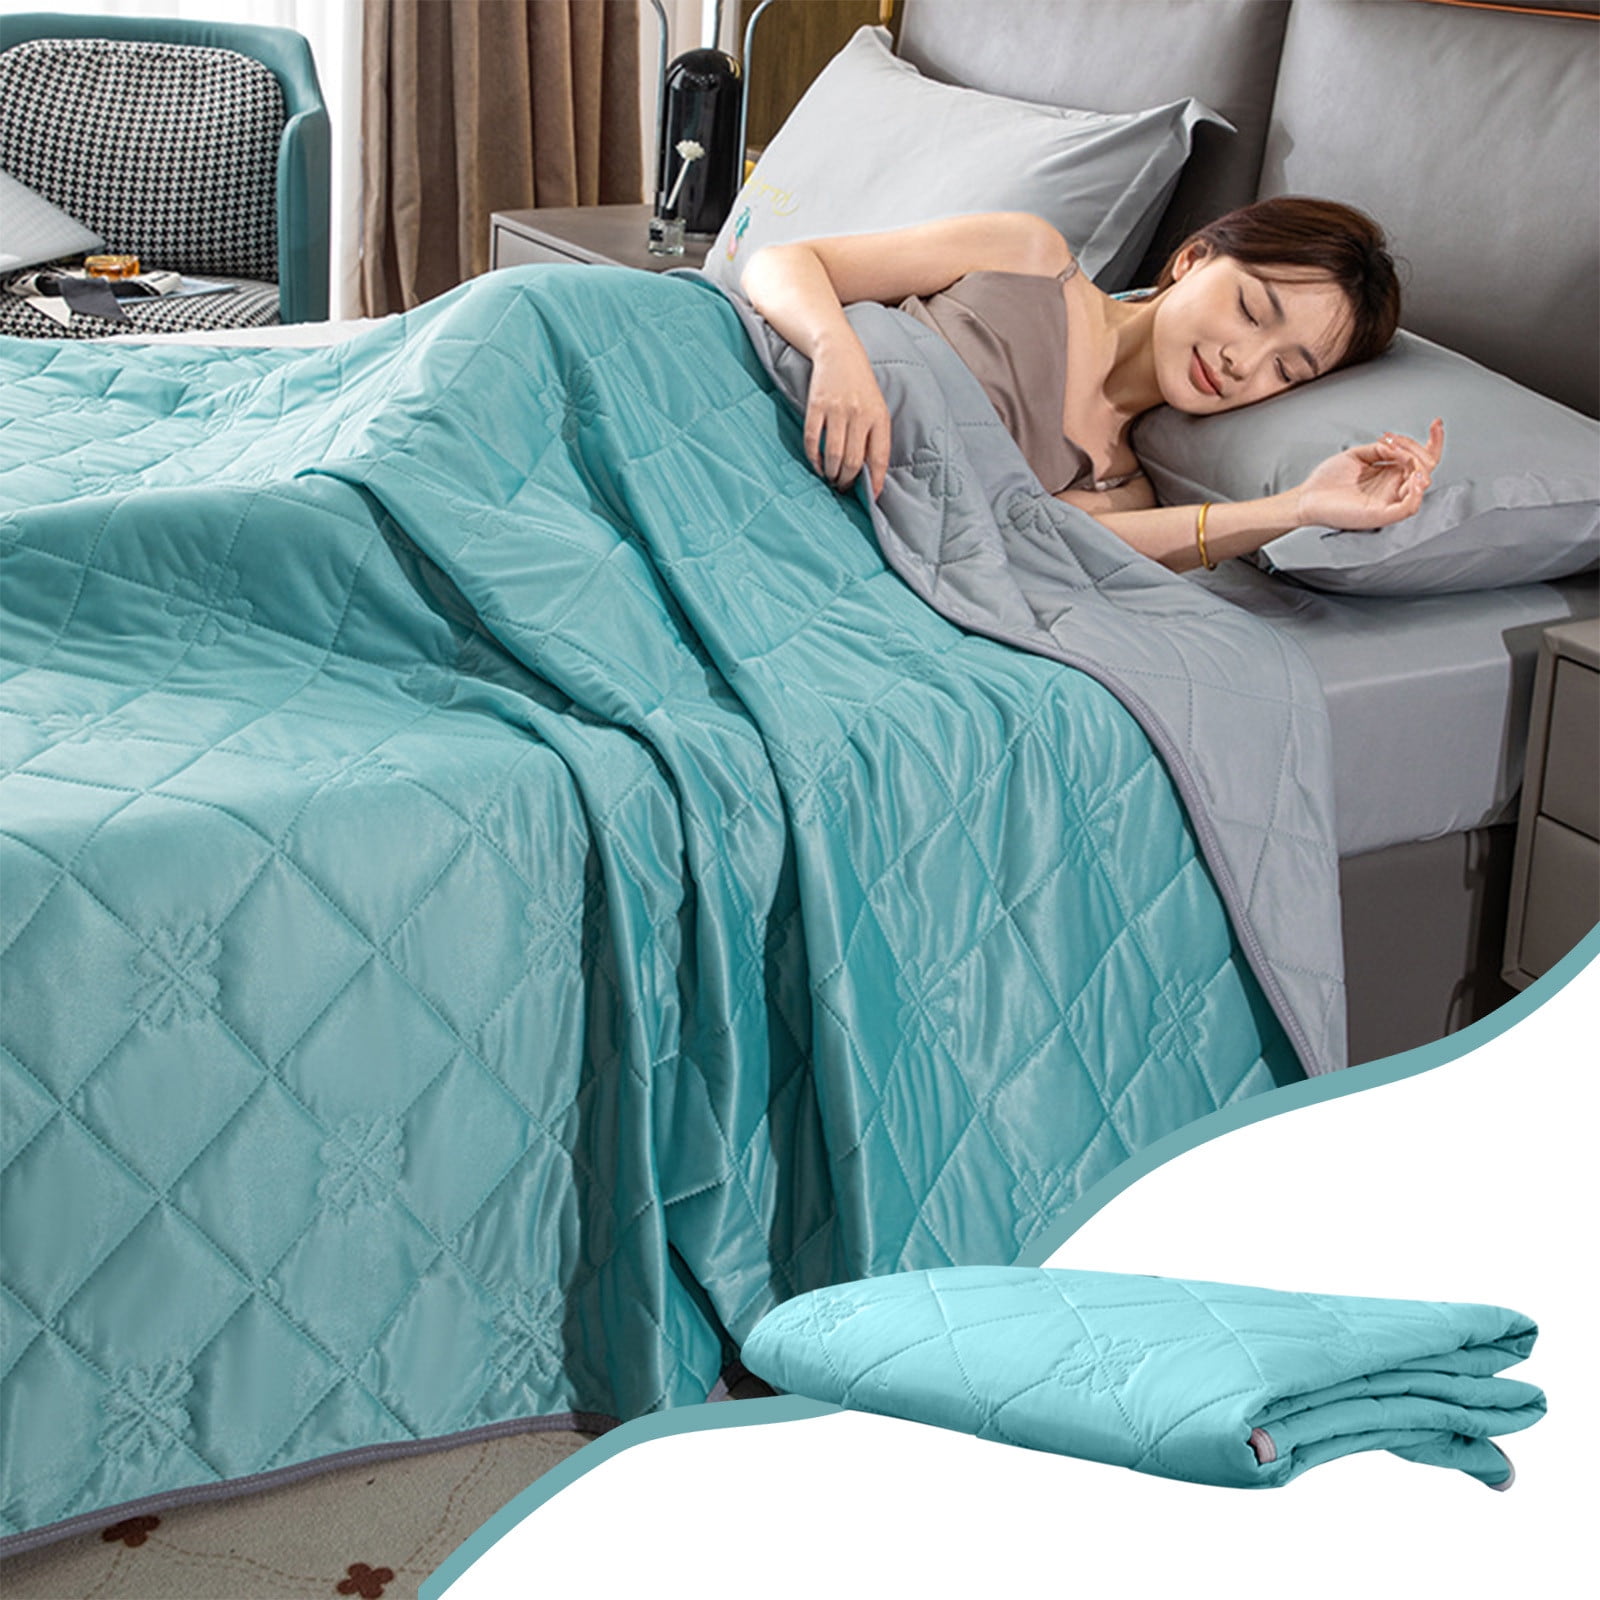 All-Season Cooler Quilt For Hot Sleepers And Night Sweats, Cooler ...